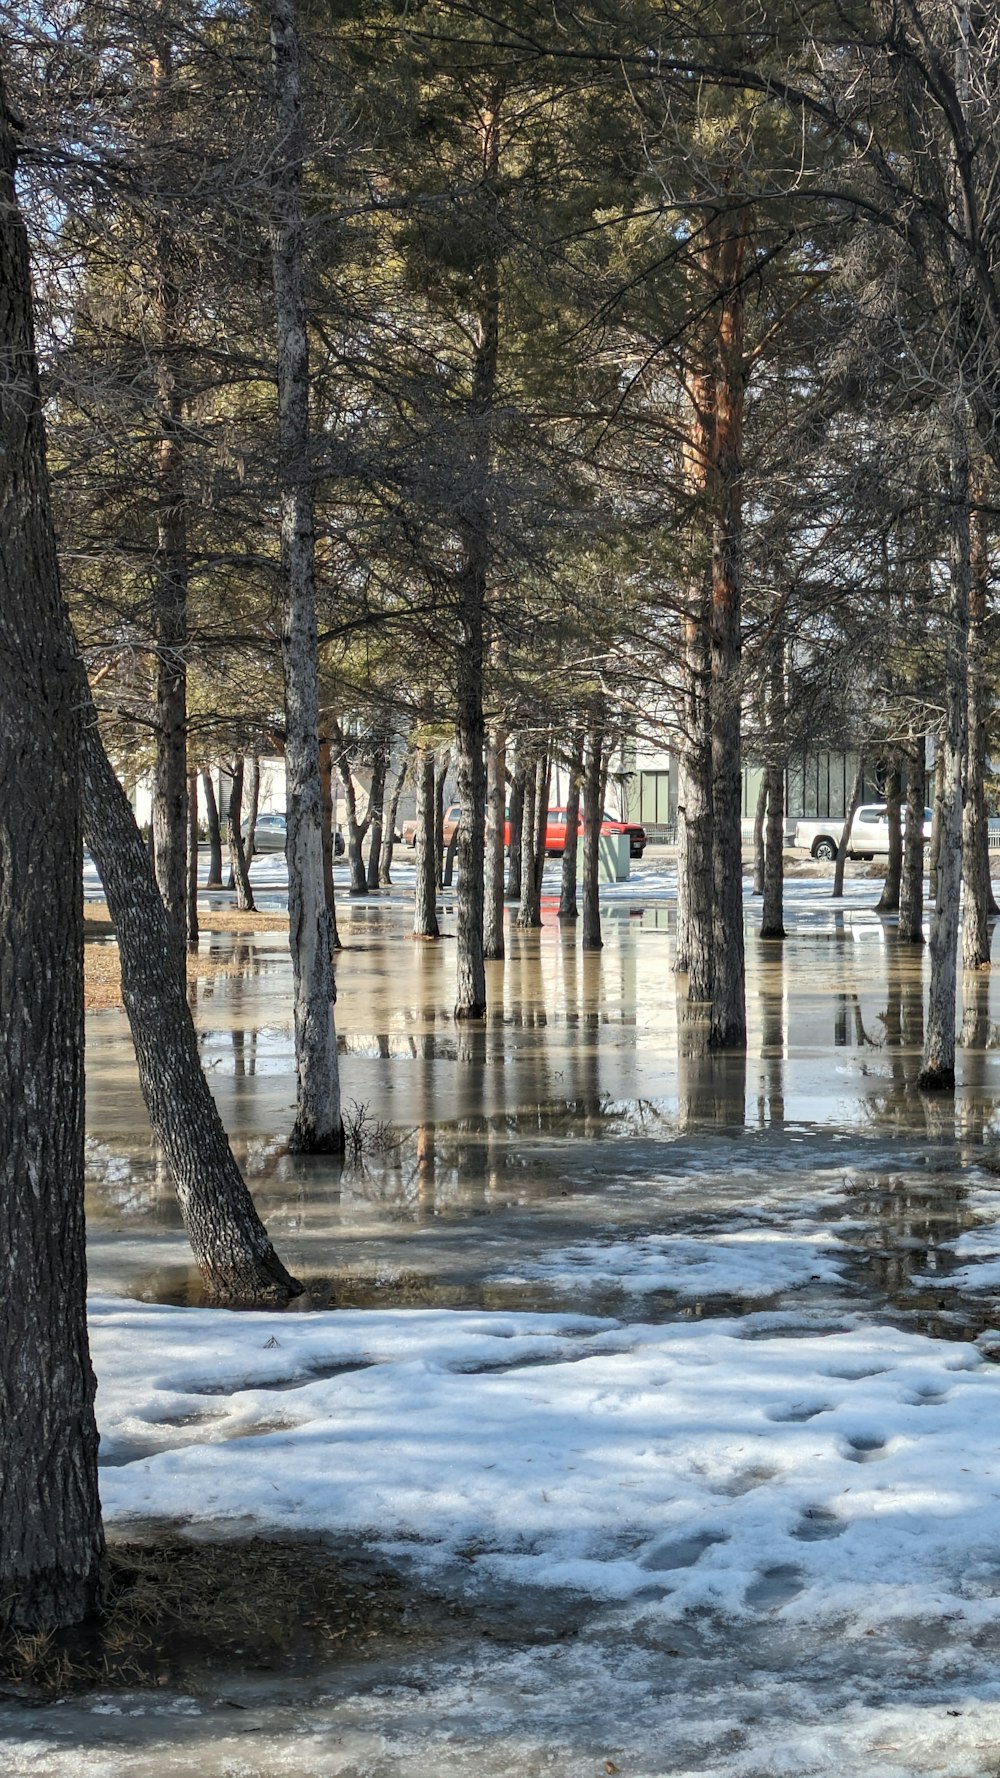 a flooded area with trees and a bus in the distance